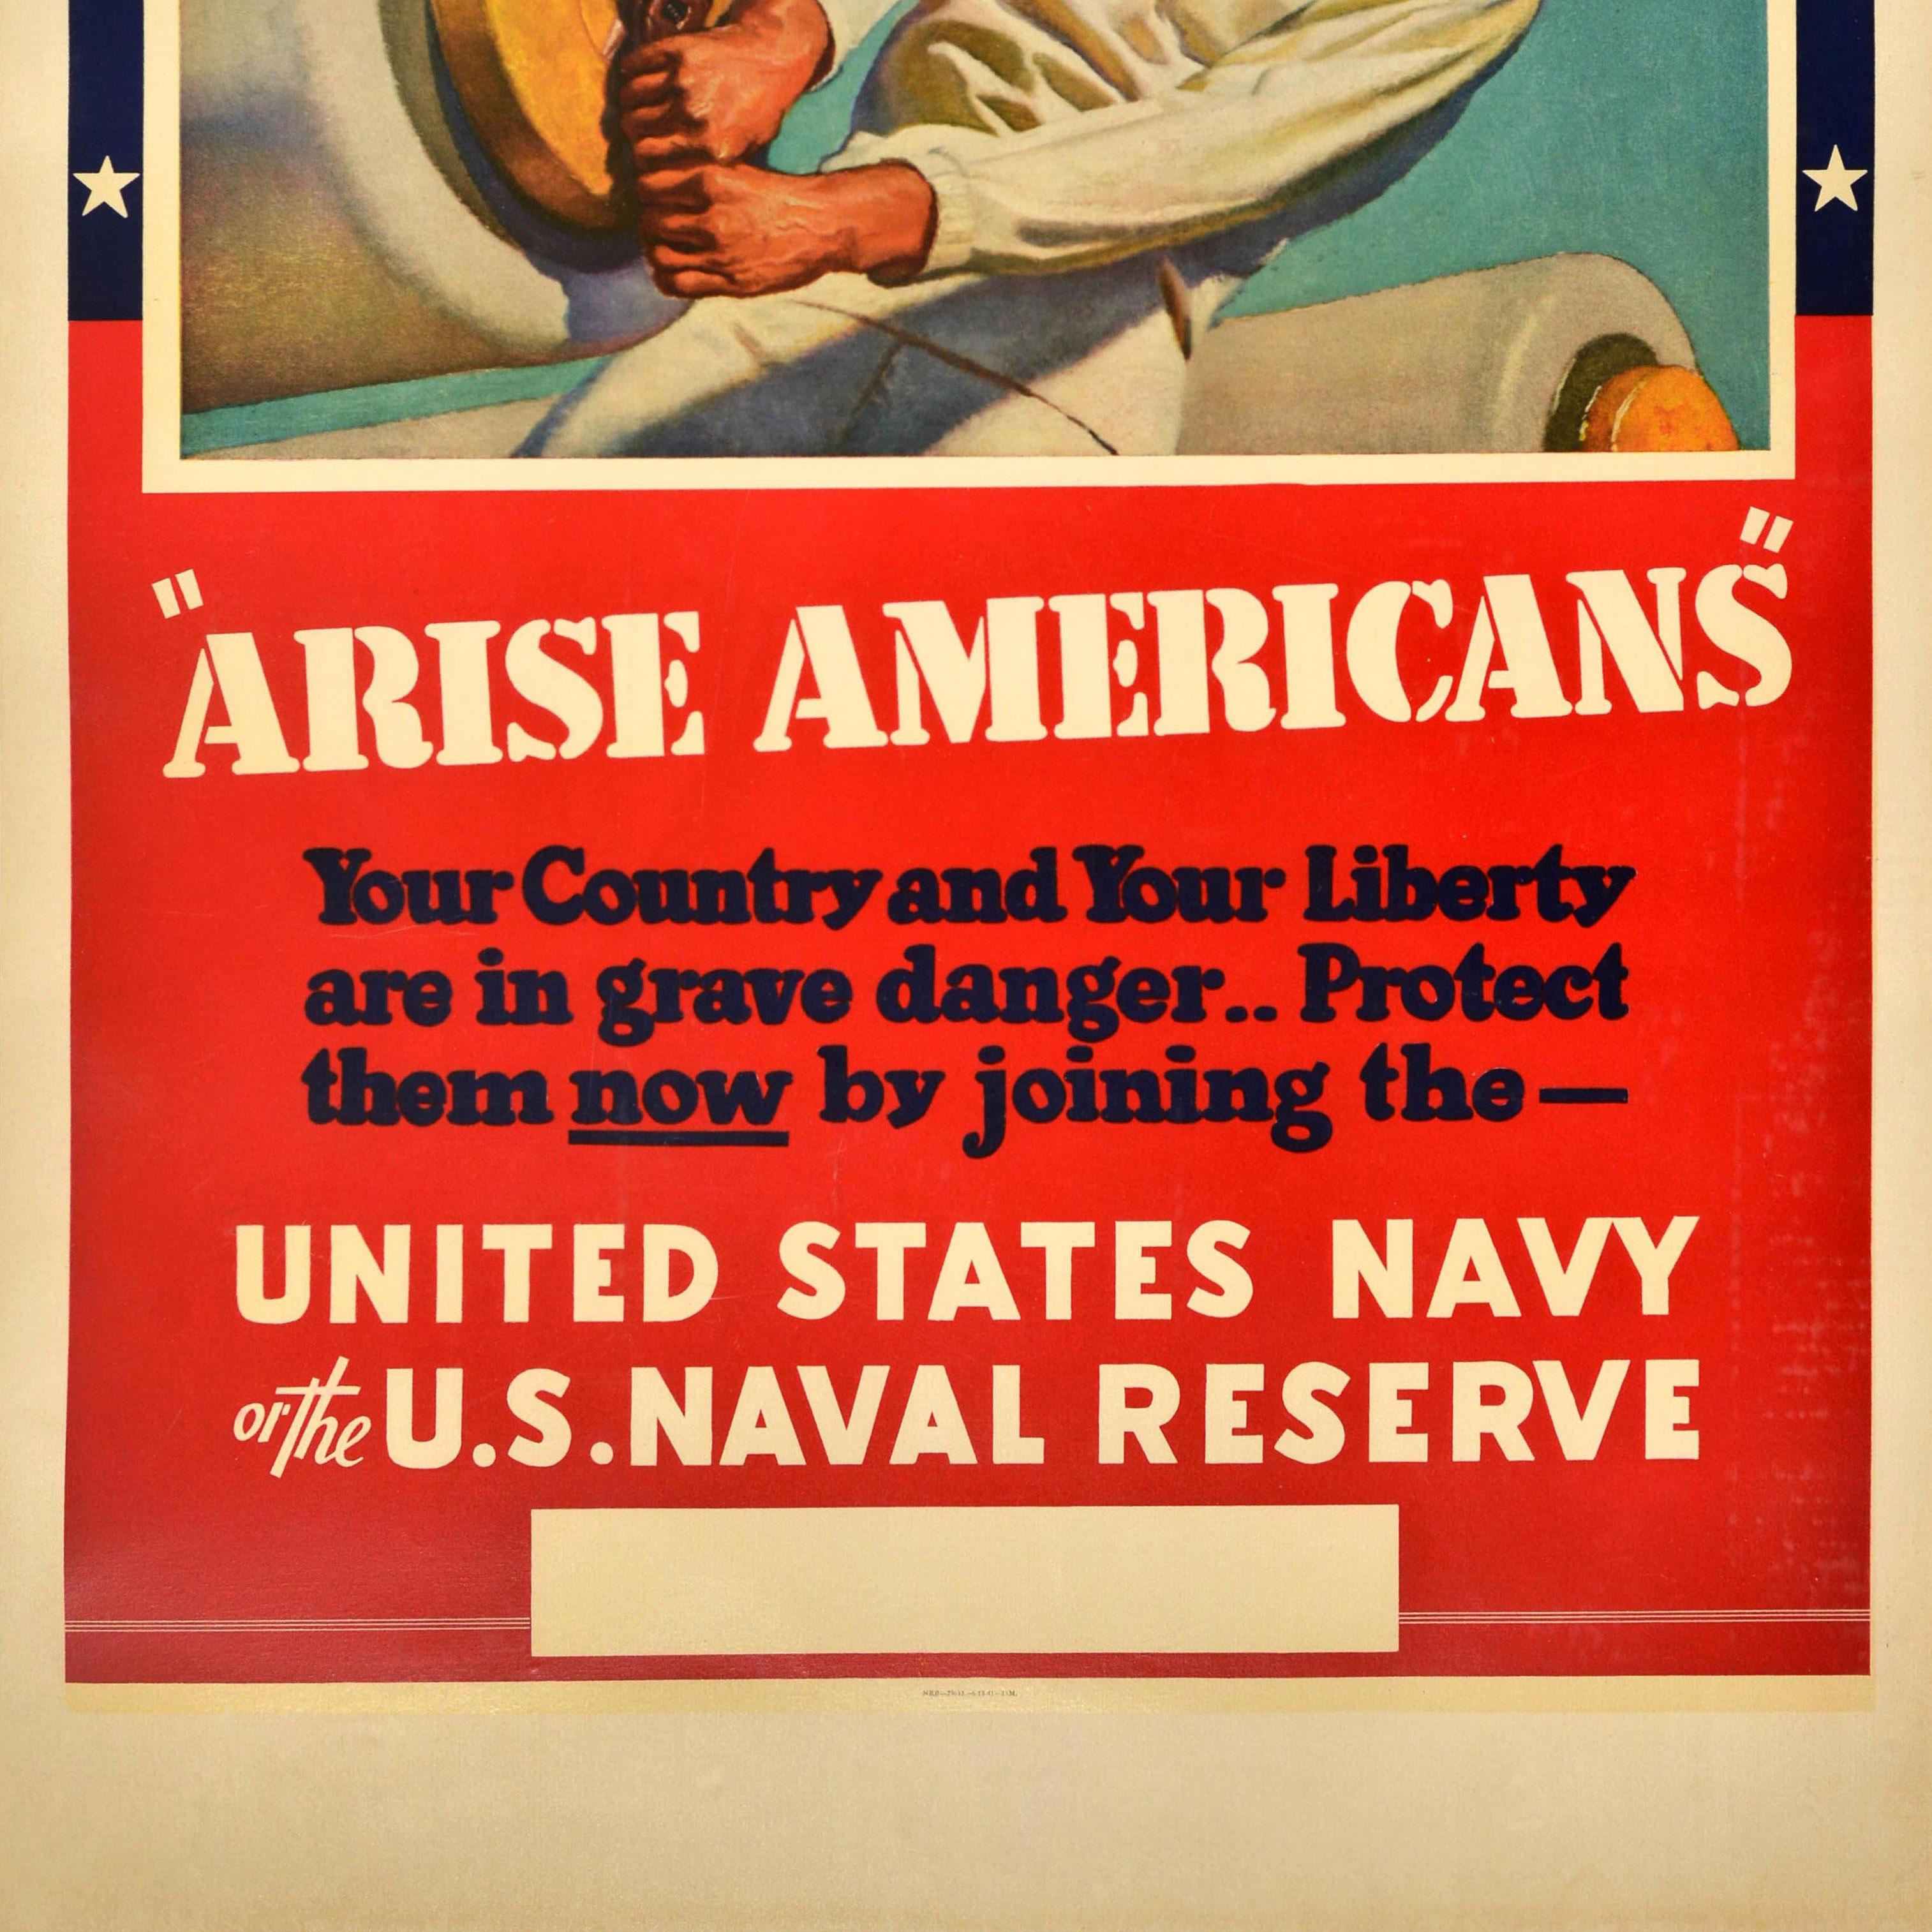 Original vintage World War Two recruitment propaganda poster - Arise Americans Your Country and Your Liberty are in grave danger Protect them now by joining the United States Navy or the U.S. Naval Reserve - featuring dynamic artwork by the American